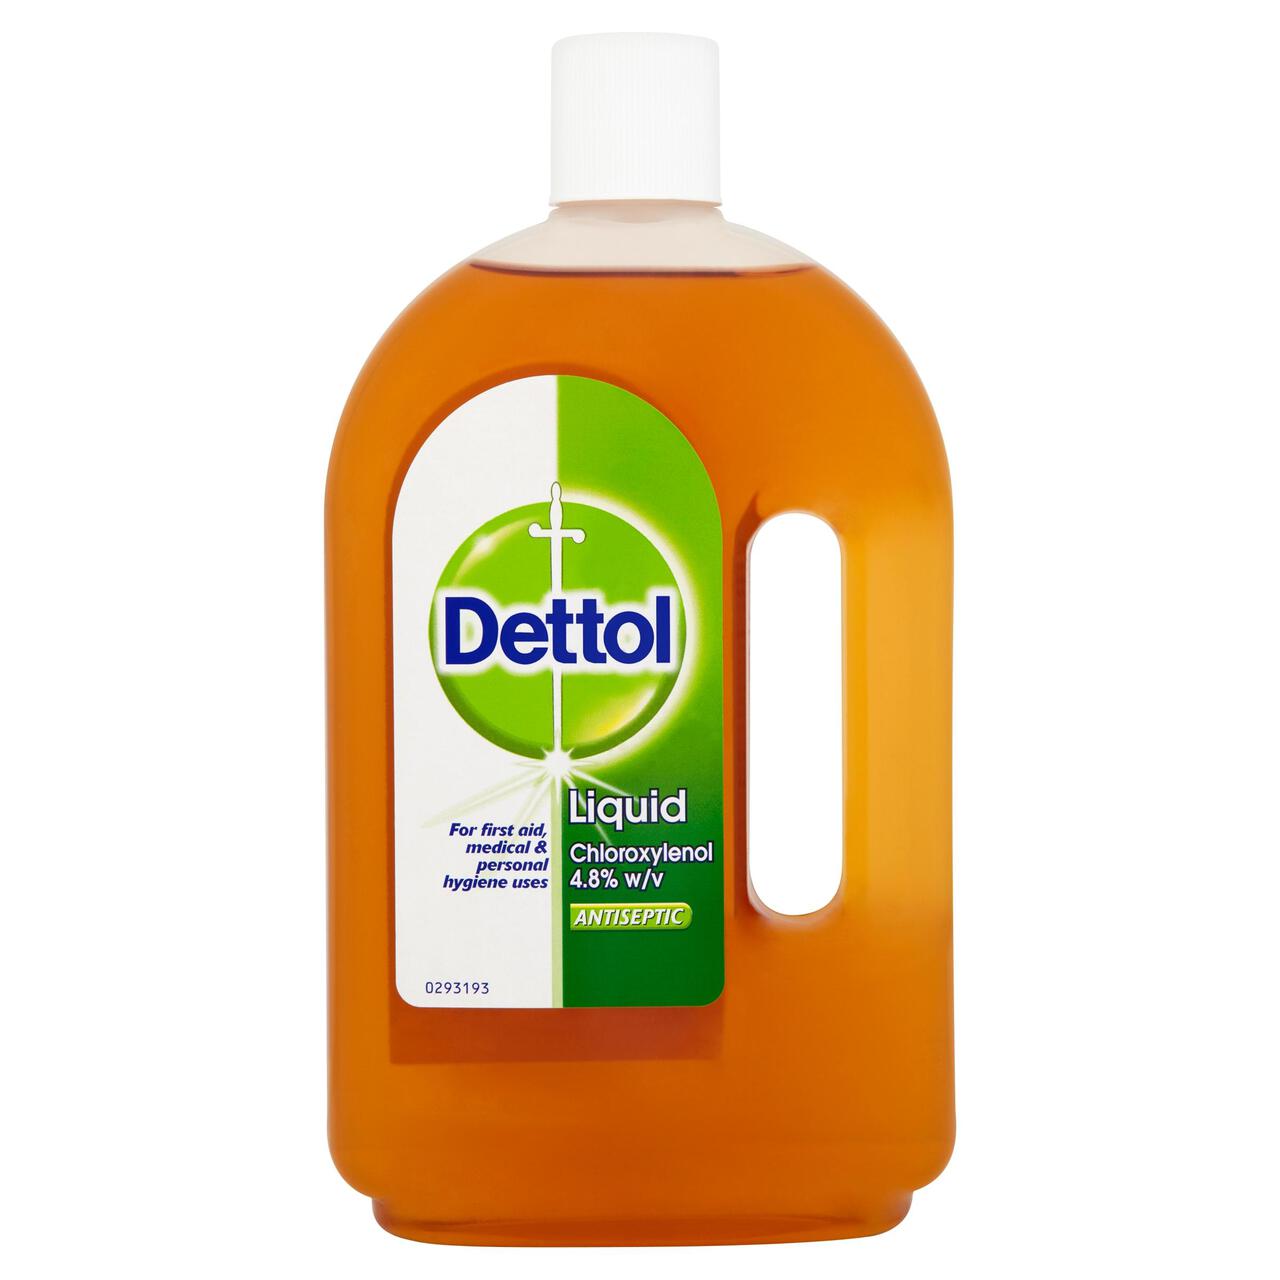 Dettol Antiseptic First Aid Disinfection Liquid 750ml